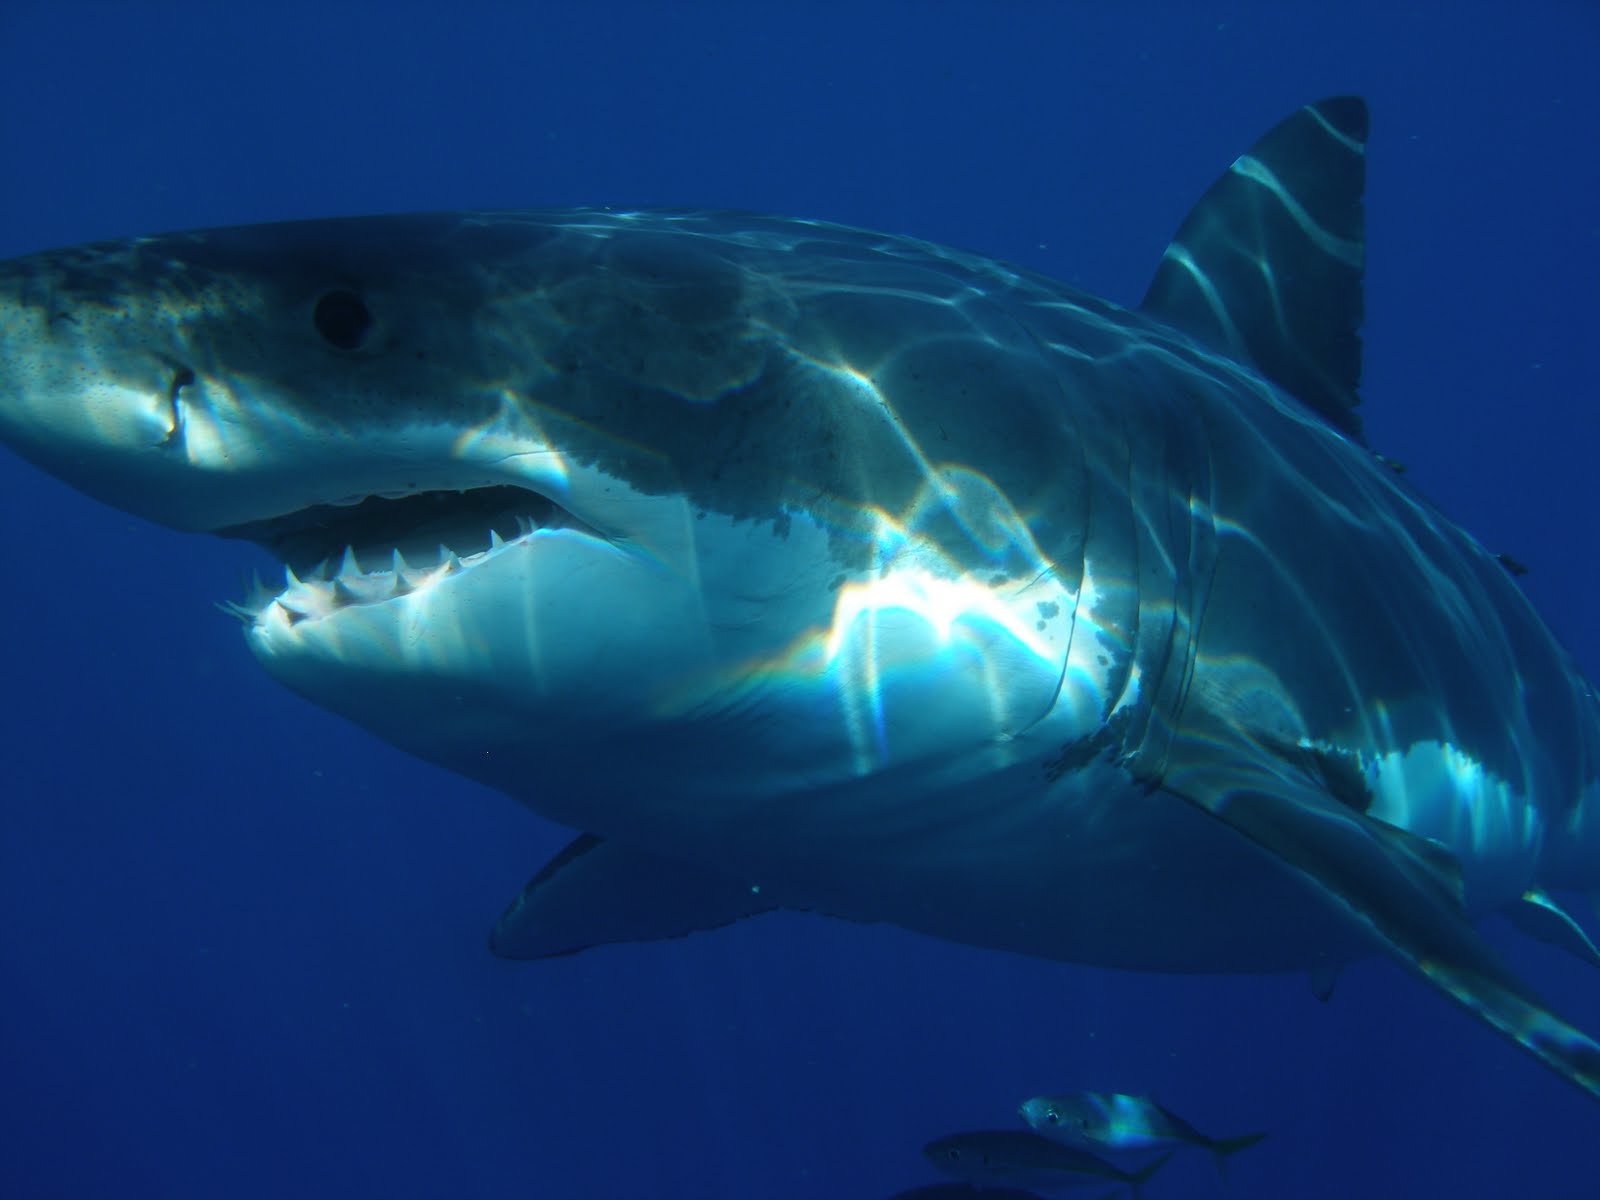 Great White Shark Images 27143 Hd Wallpapers in Animals   Imagescicom 1600x1200